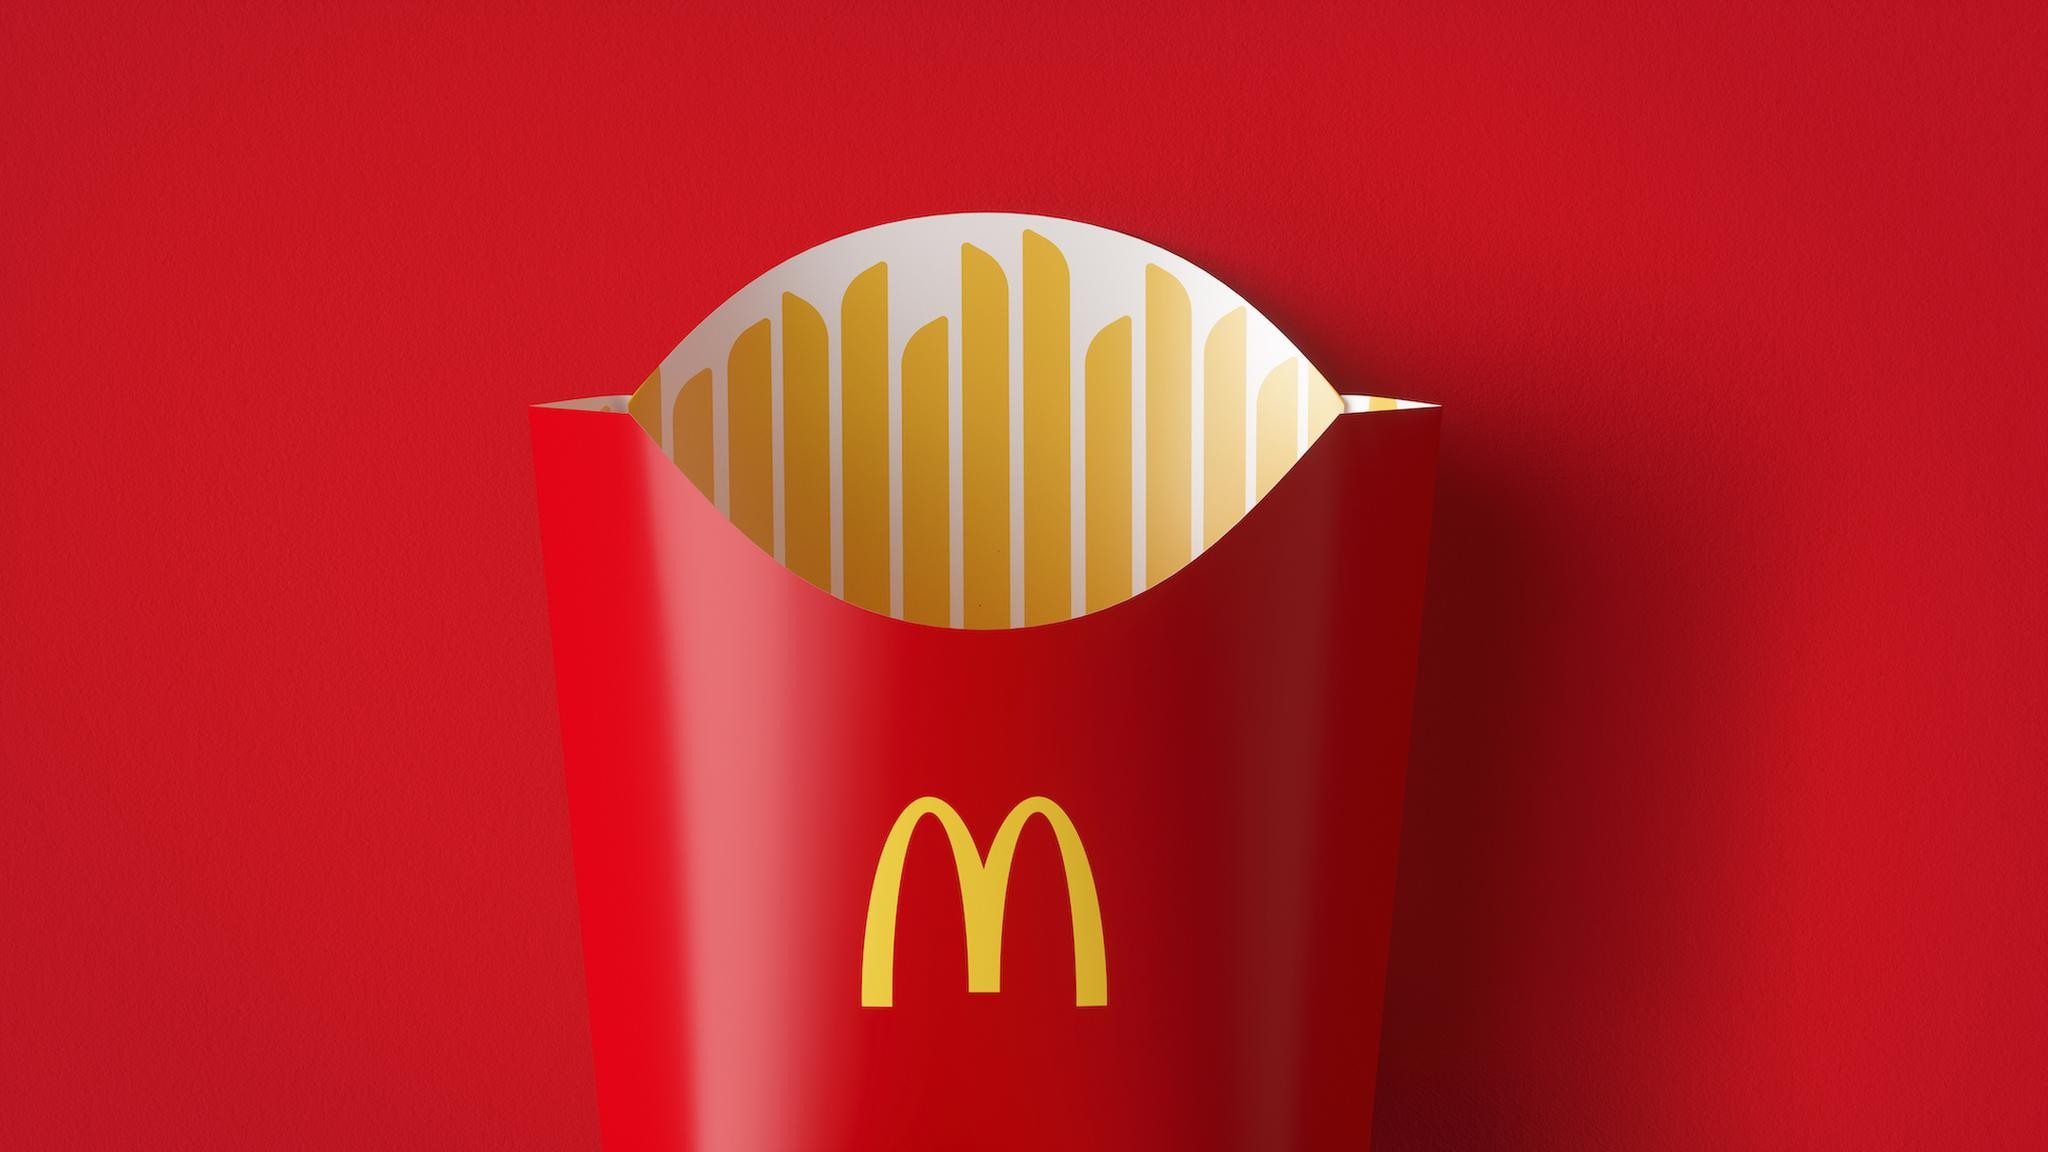 McDonald's: Making Feel-good Moments Easy for Everyone